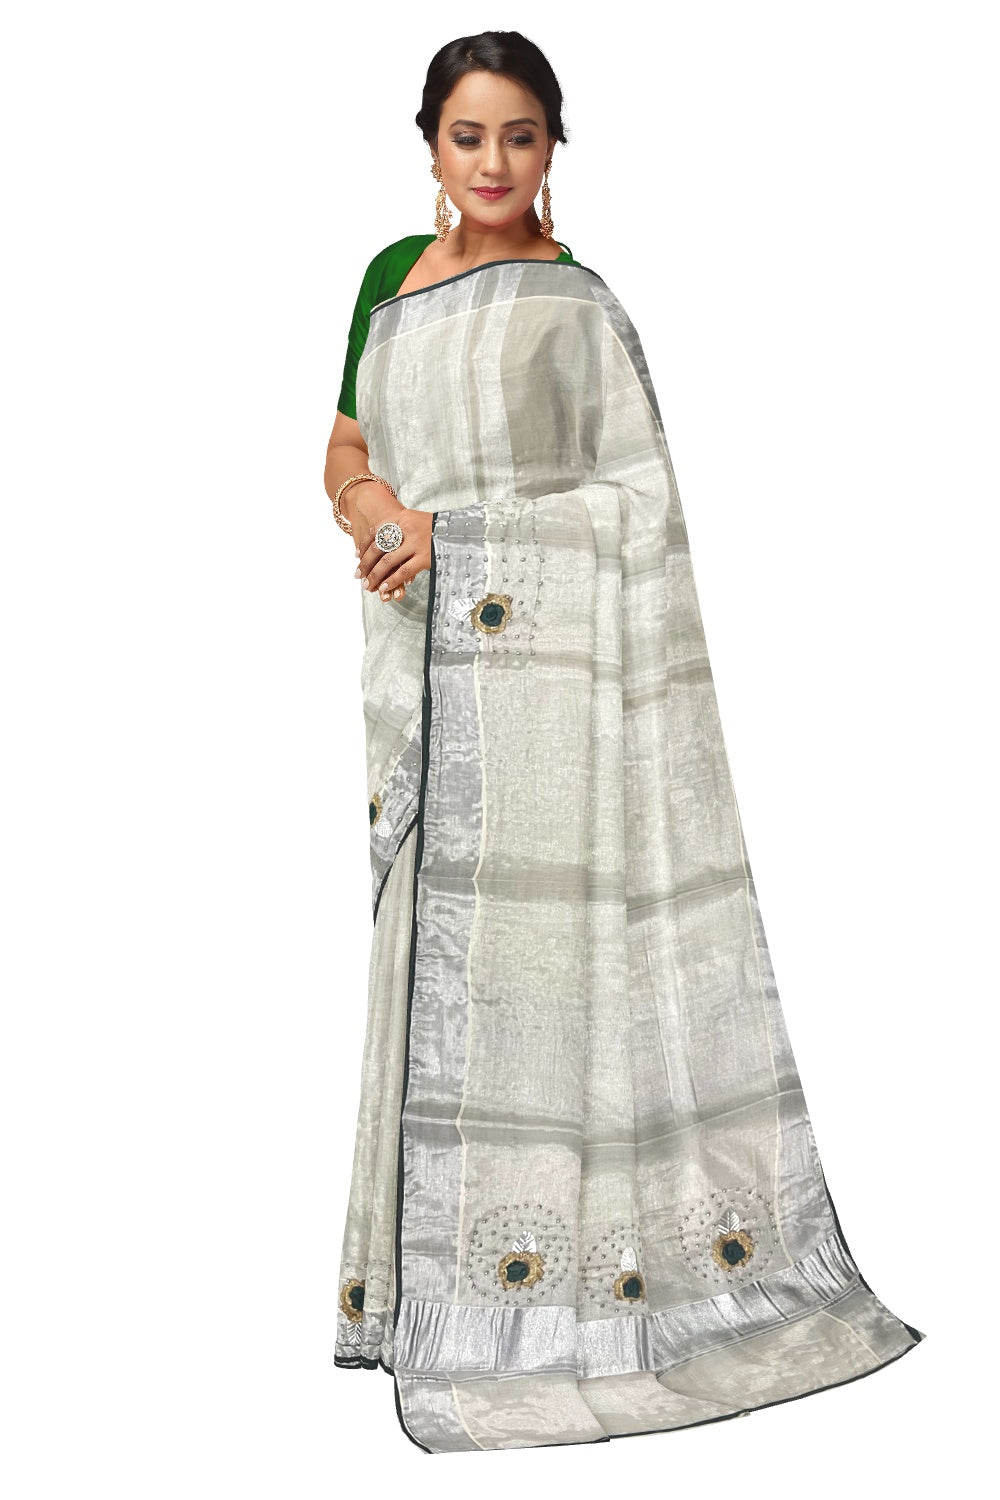 Kerala Silver Tissue Kasavu Saree with Embroidery Bead and Mirrorwork Design and Dark Green Piping Works on Border